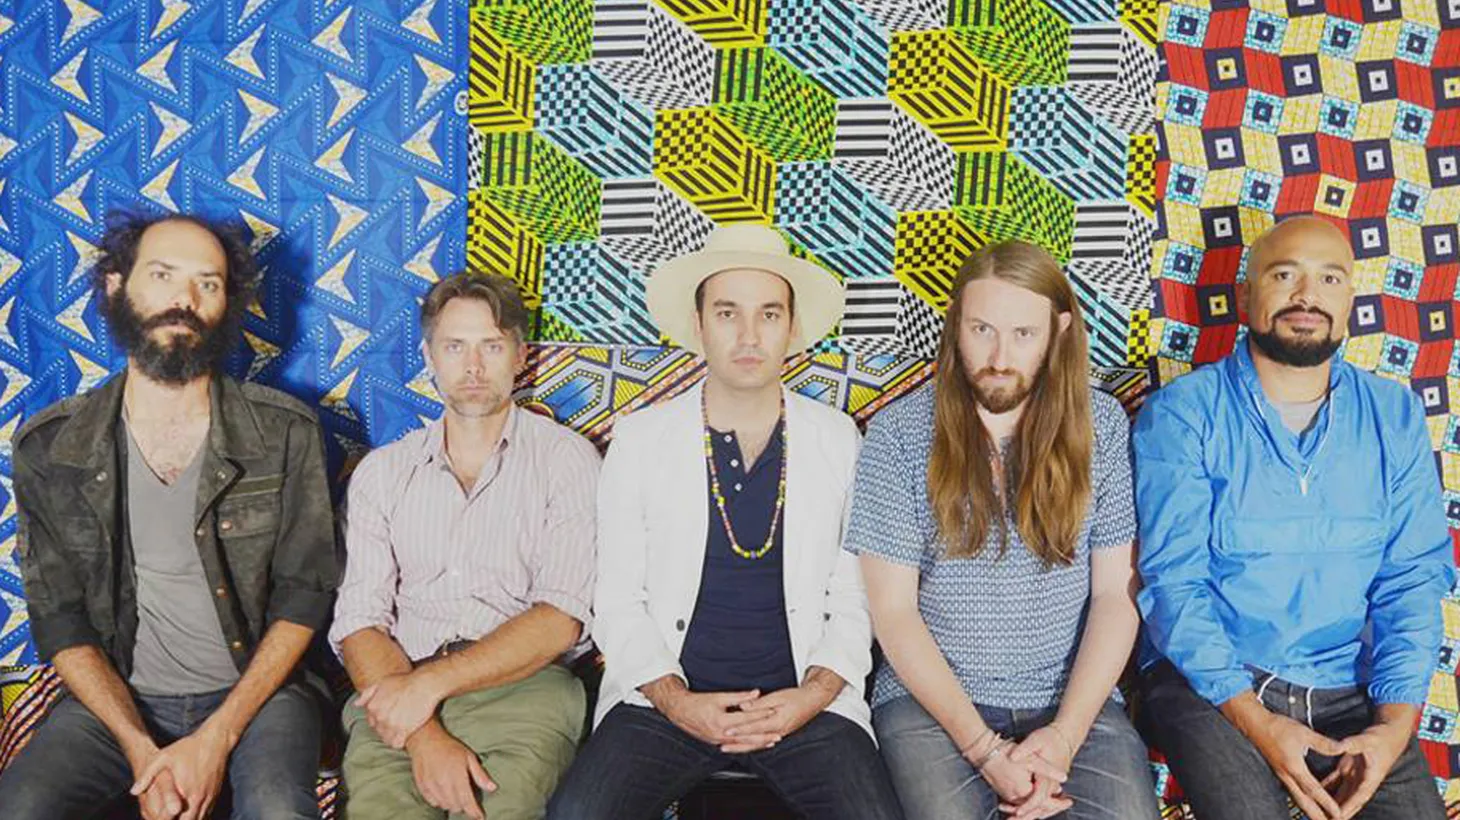 After extensive touring, LA collective Fool's Gold settled down to write a new album.